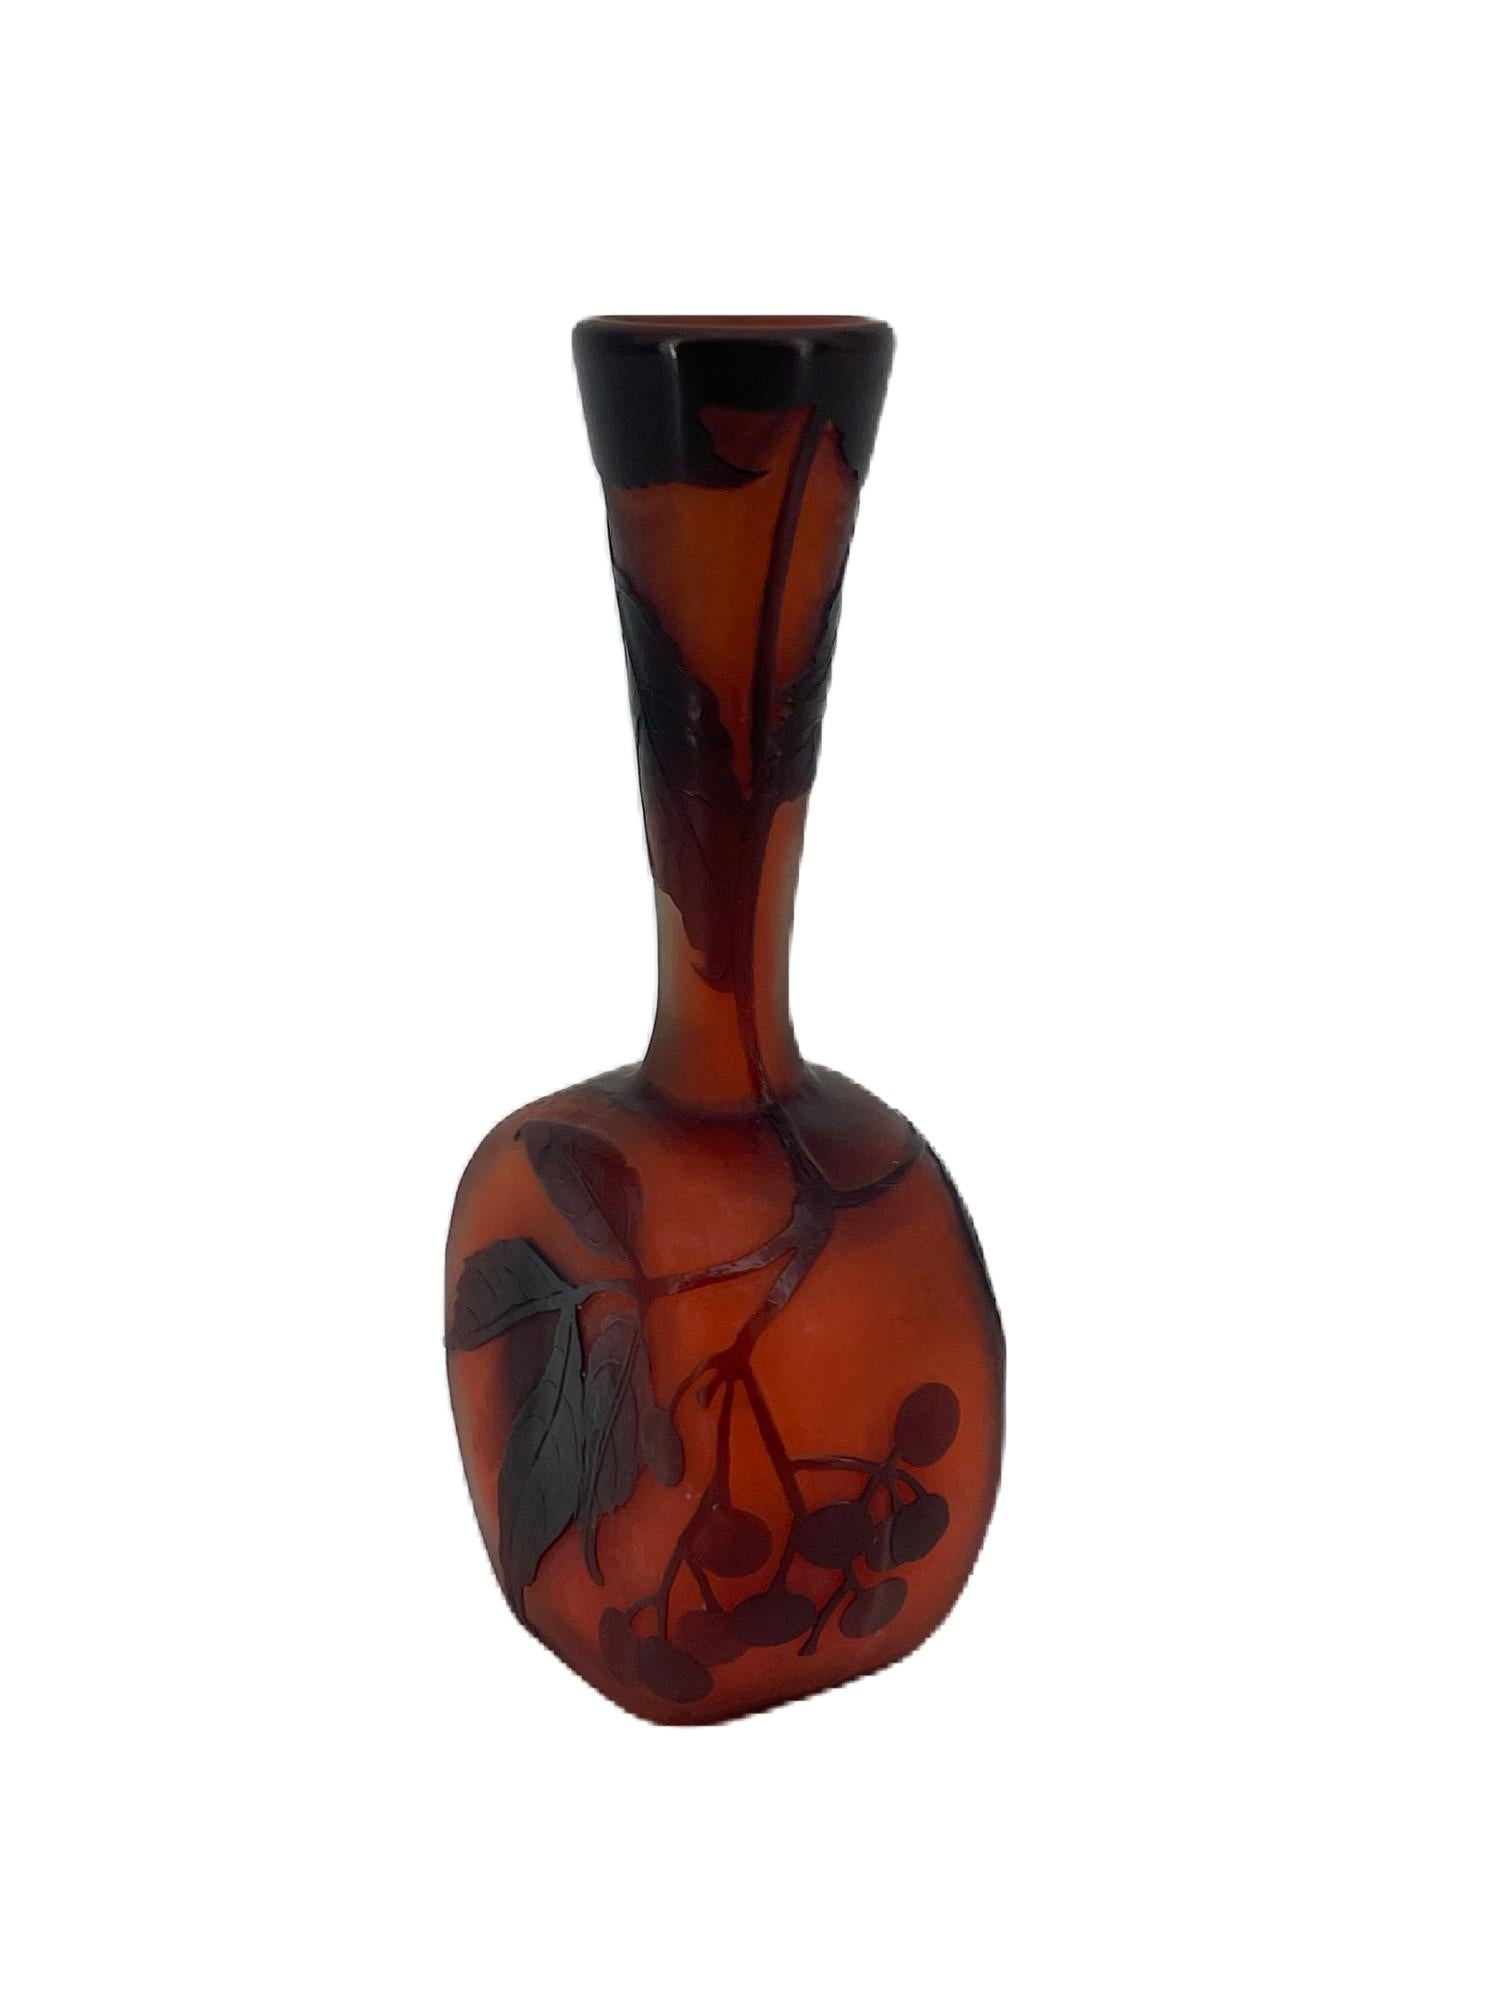 Small French Emile Gallé vase in orange glass. Signed Galle’.
Produced in circa 1910.
Émile Gallé
Émile Gallé (Nancy, 4 May 1846 - there, 23 September 1904 ) was a French glass maker and furniture designer who had his home base in his birthplace.